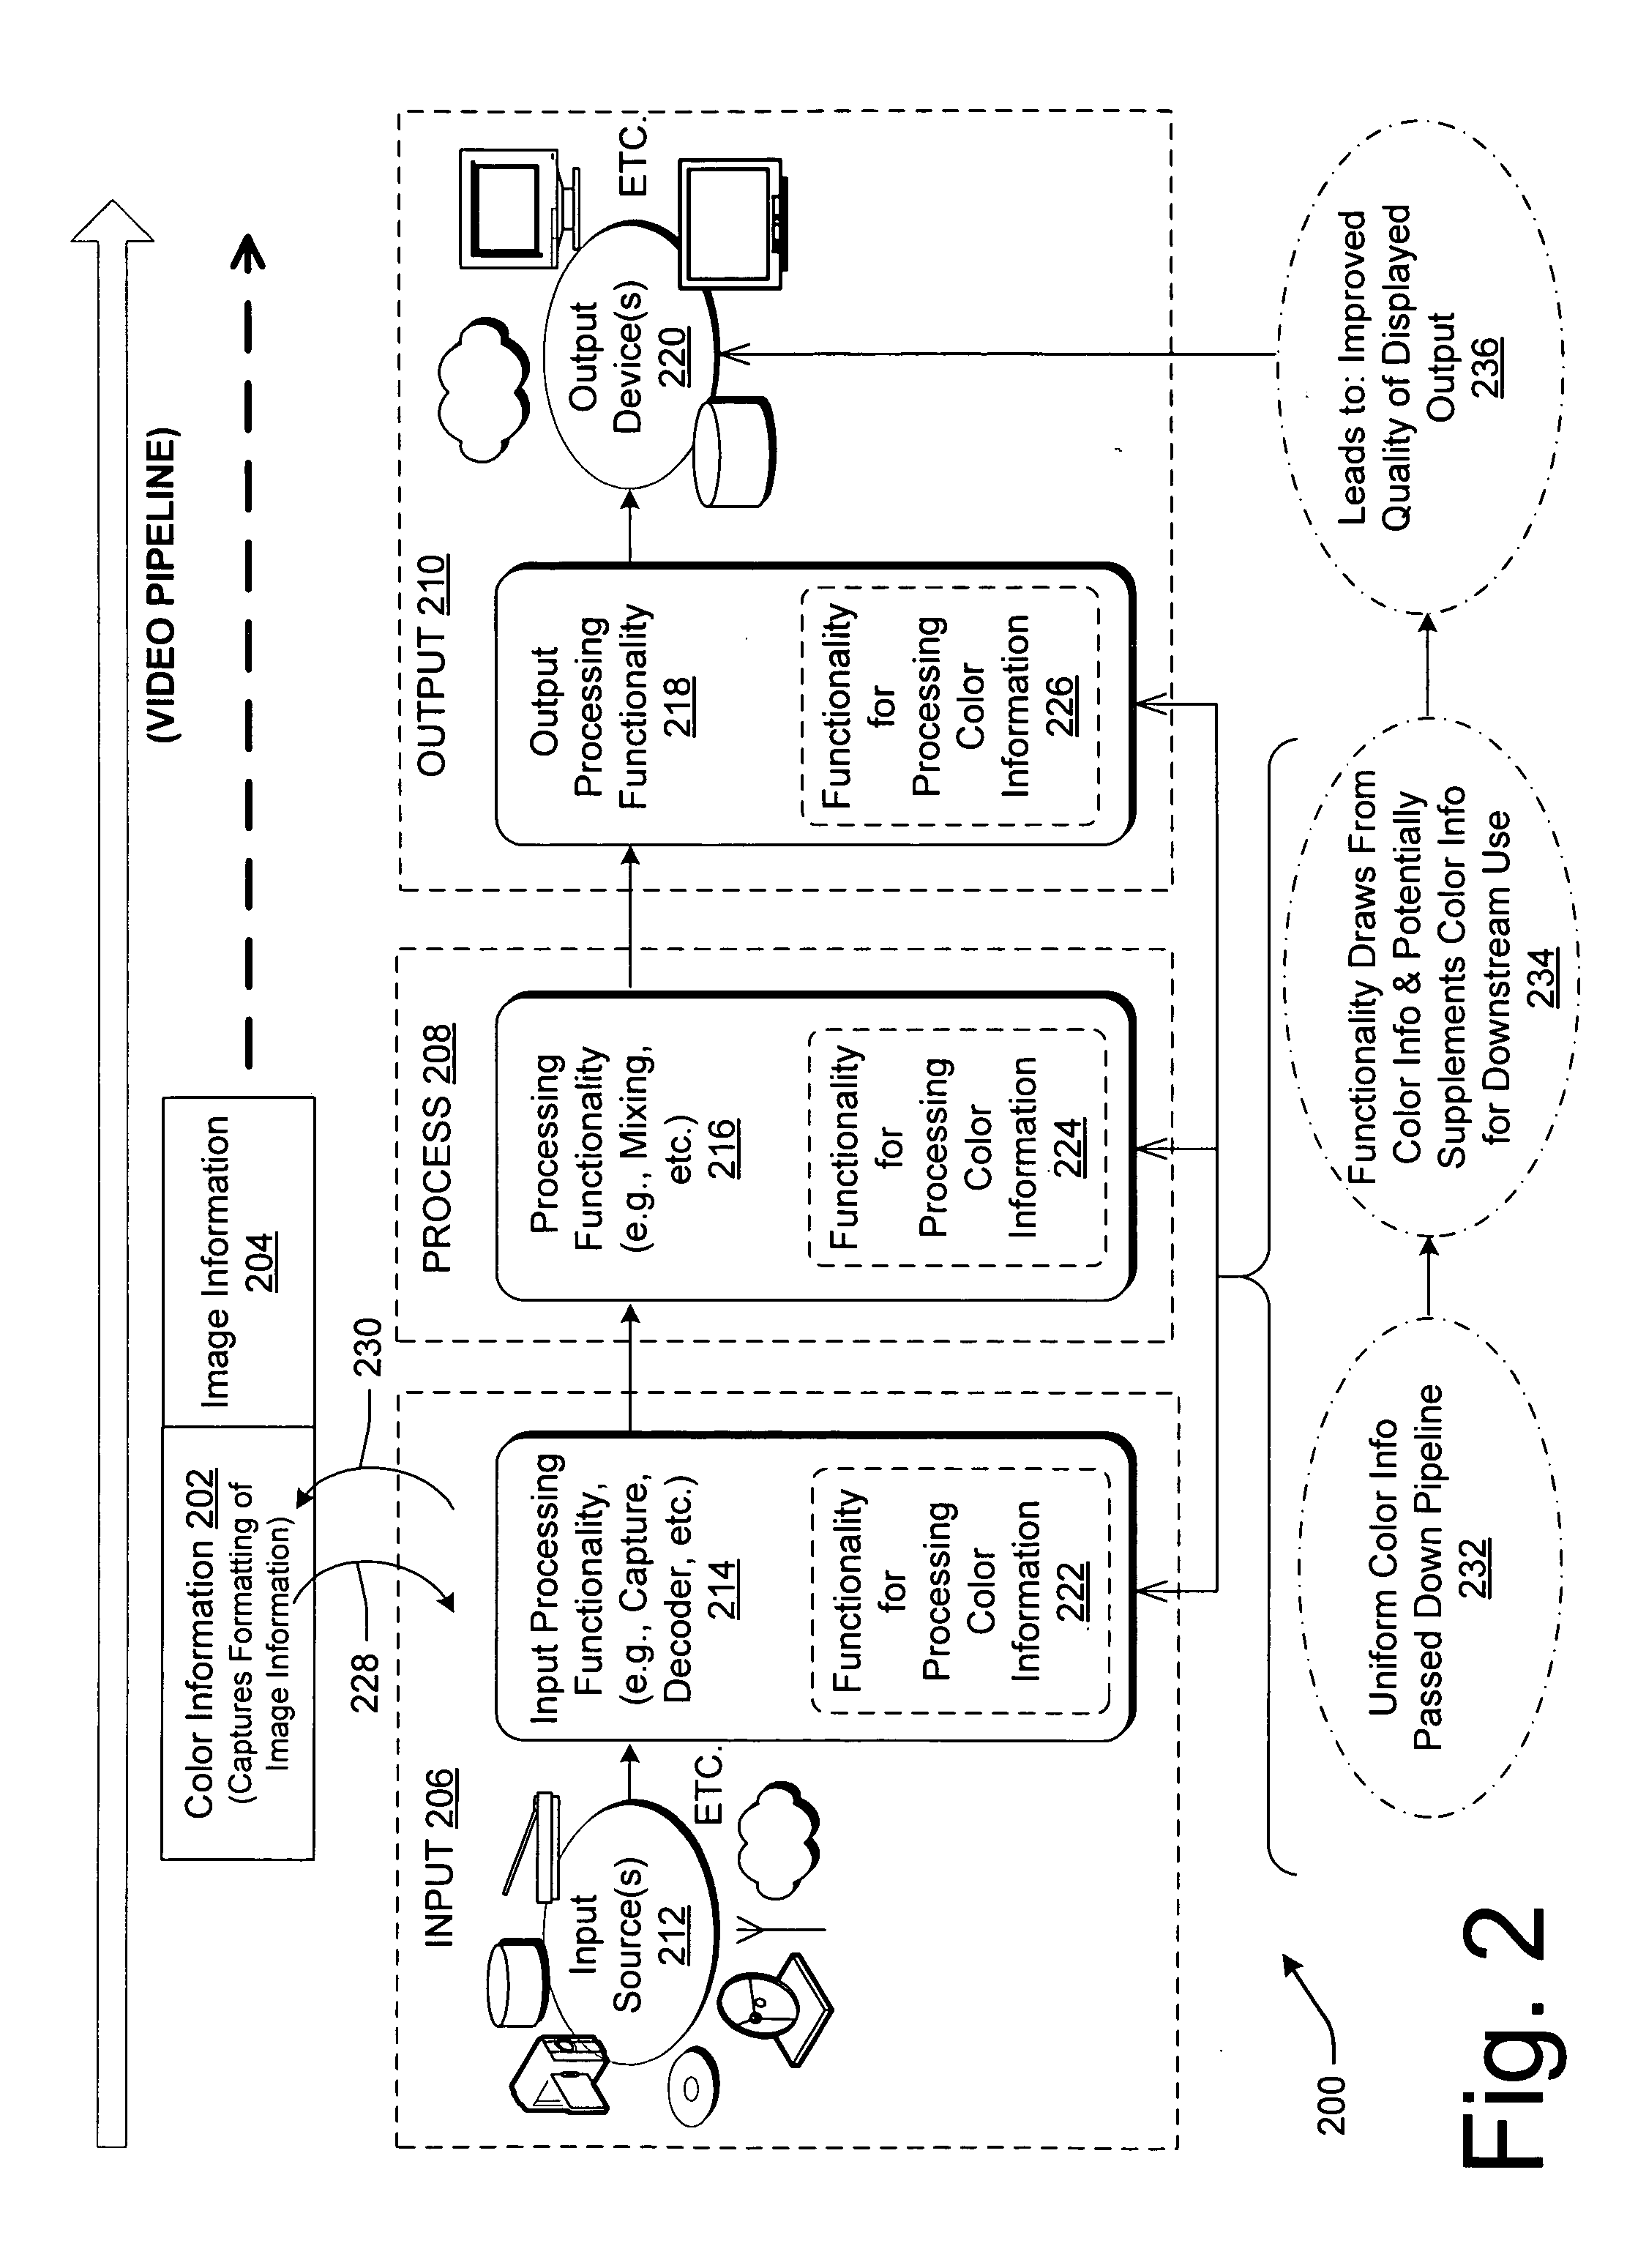 Strategies for processing image information using a color information data structure